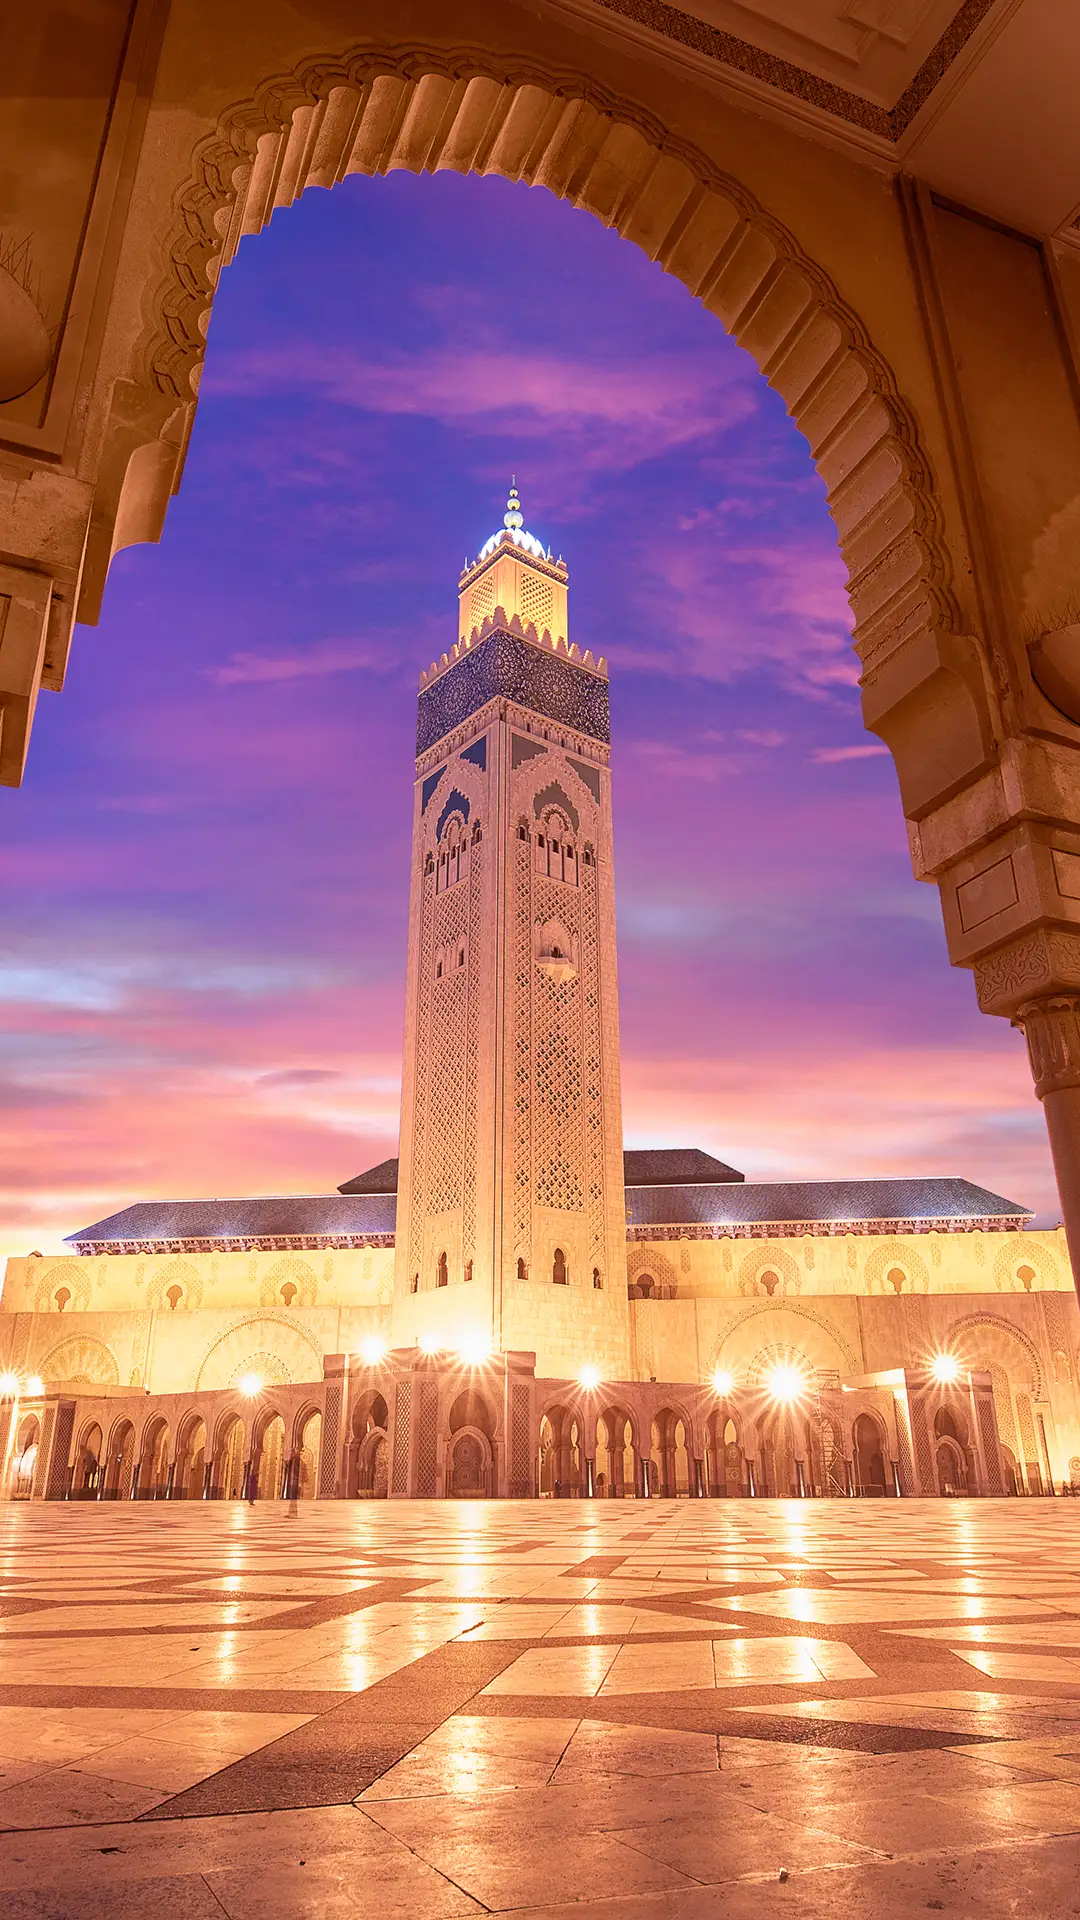 The Hassan II Mosque at sunset in Casablanca, Morocco.